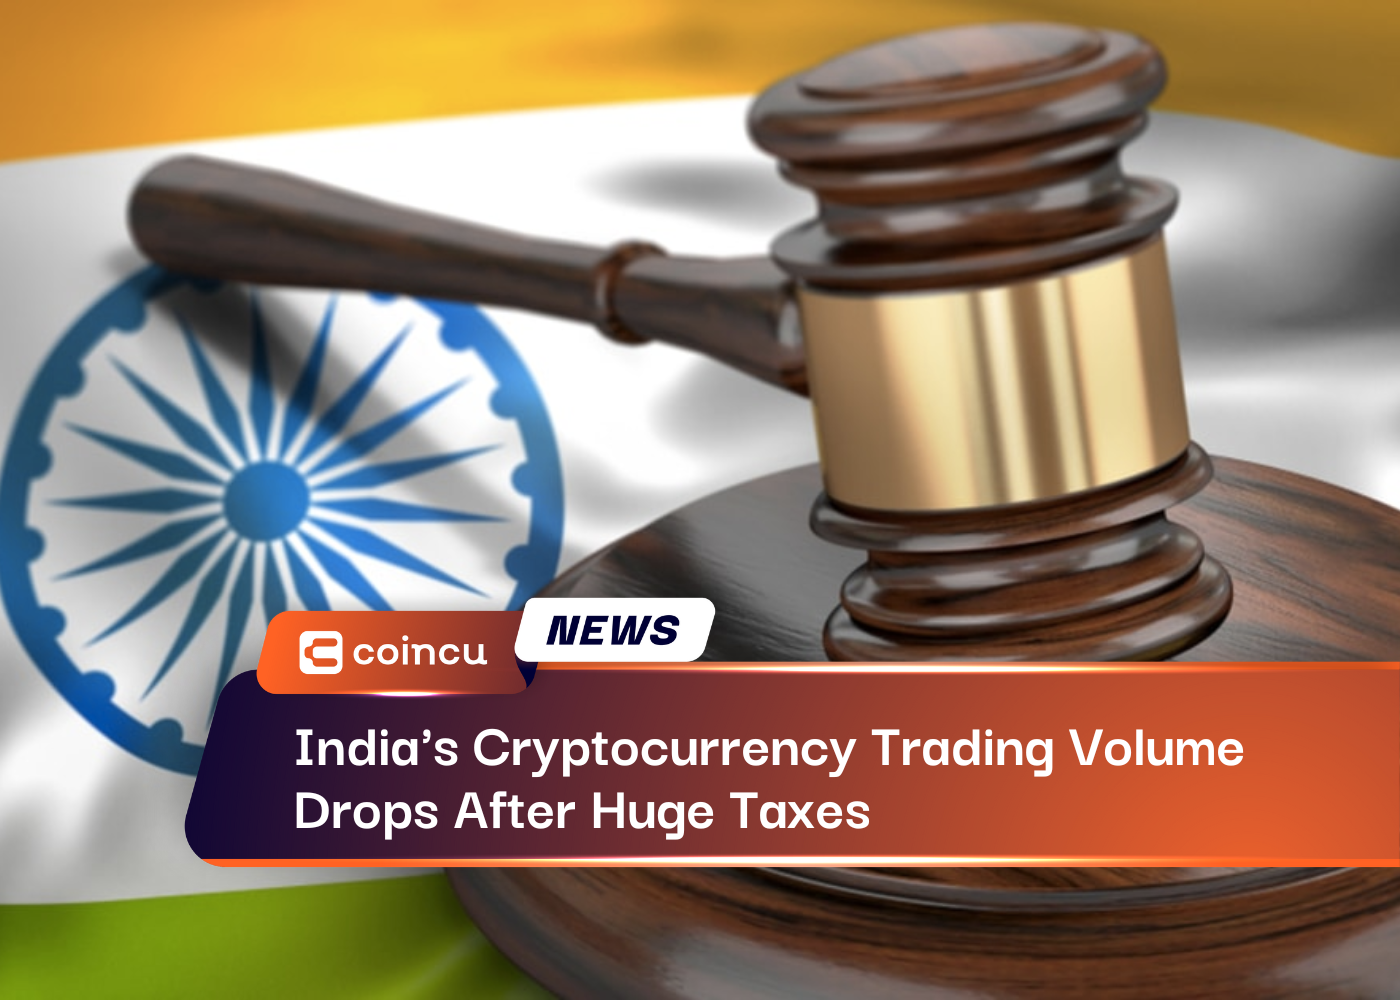 India's Cryptocurrency Trading Volume Drops After Huge Taxes